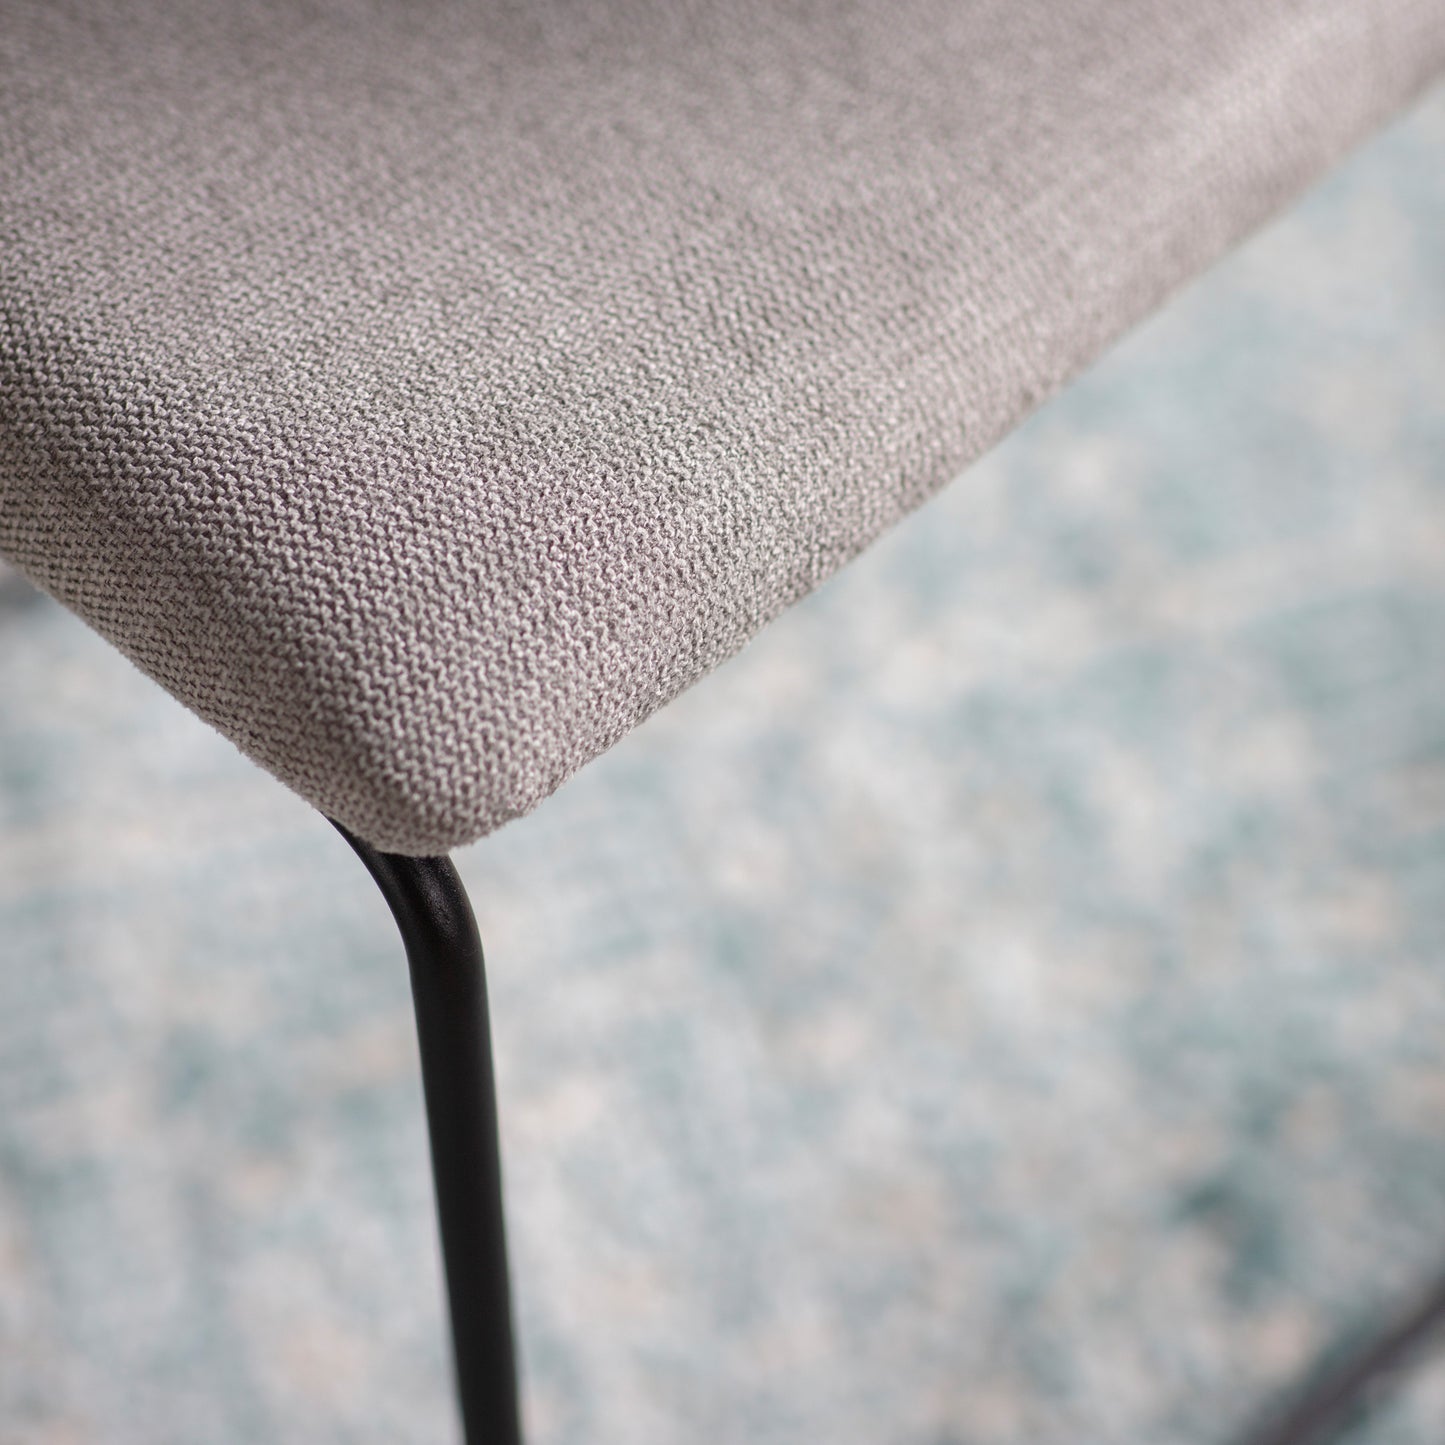 A close up of a Chivelstone Dining Chair Light Grey (2pk) by Kikiathome.co.uk on a blue rug, showcasing interior decor and home furniture.